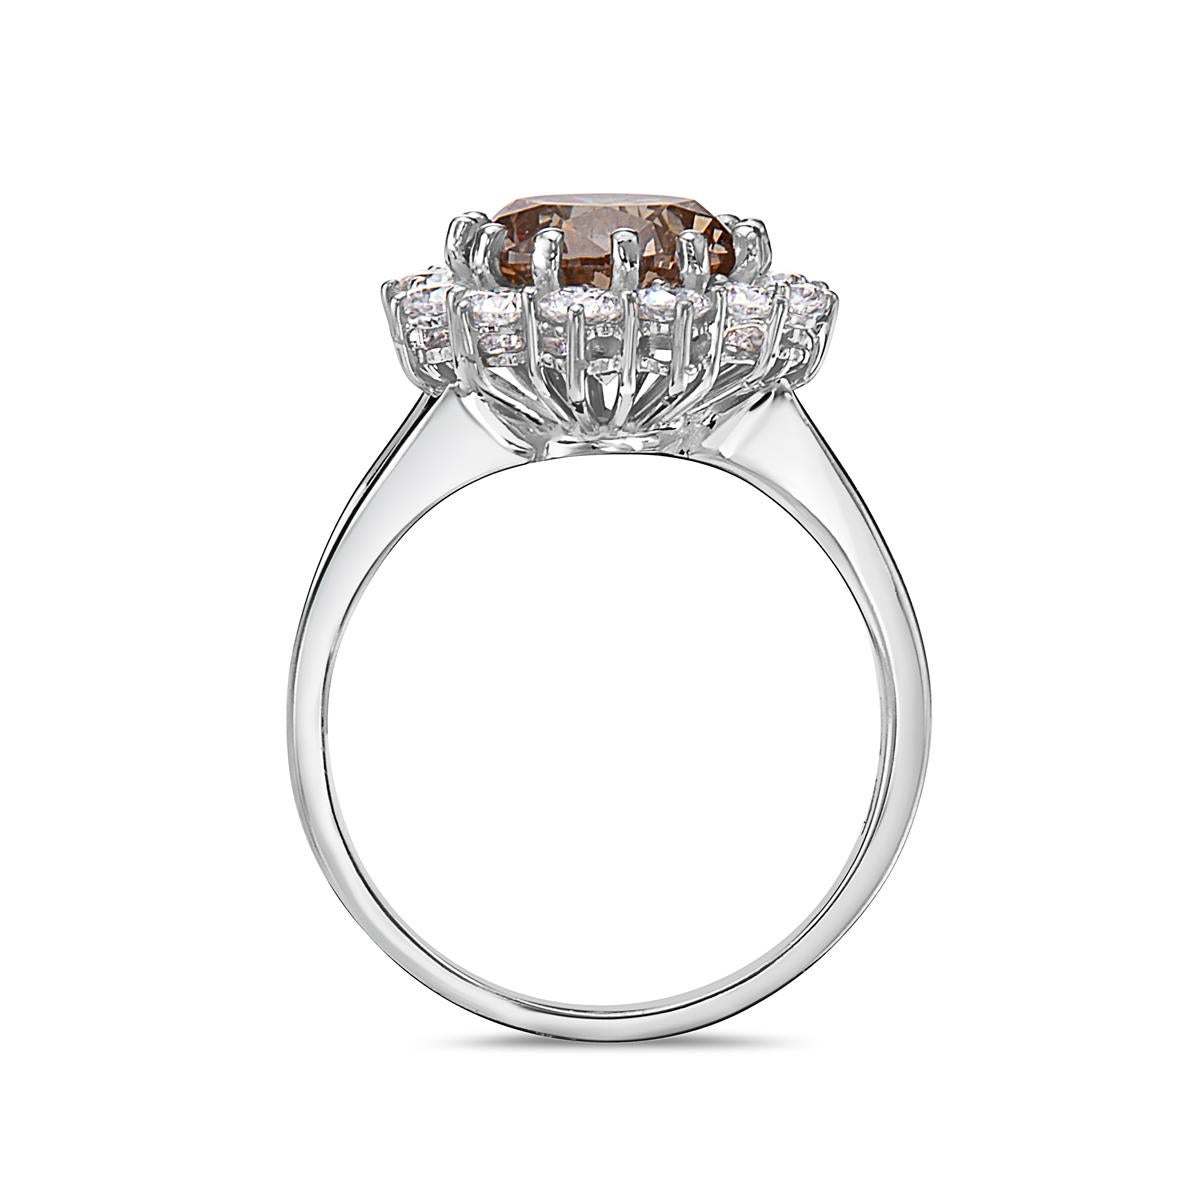 This engagement ring features a 3.04 carat brown/champagne center stone and approximately 0.90 ct. of white diamonds G/H VS/SI
Size 7
Made in Italy

Resizing available upon request